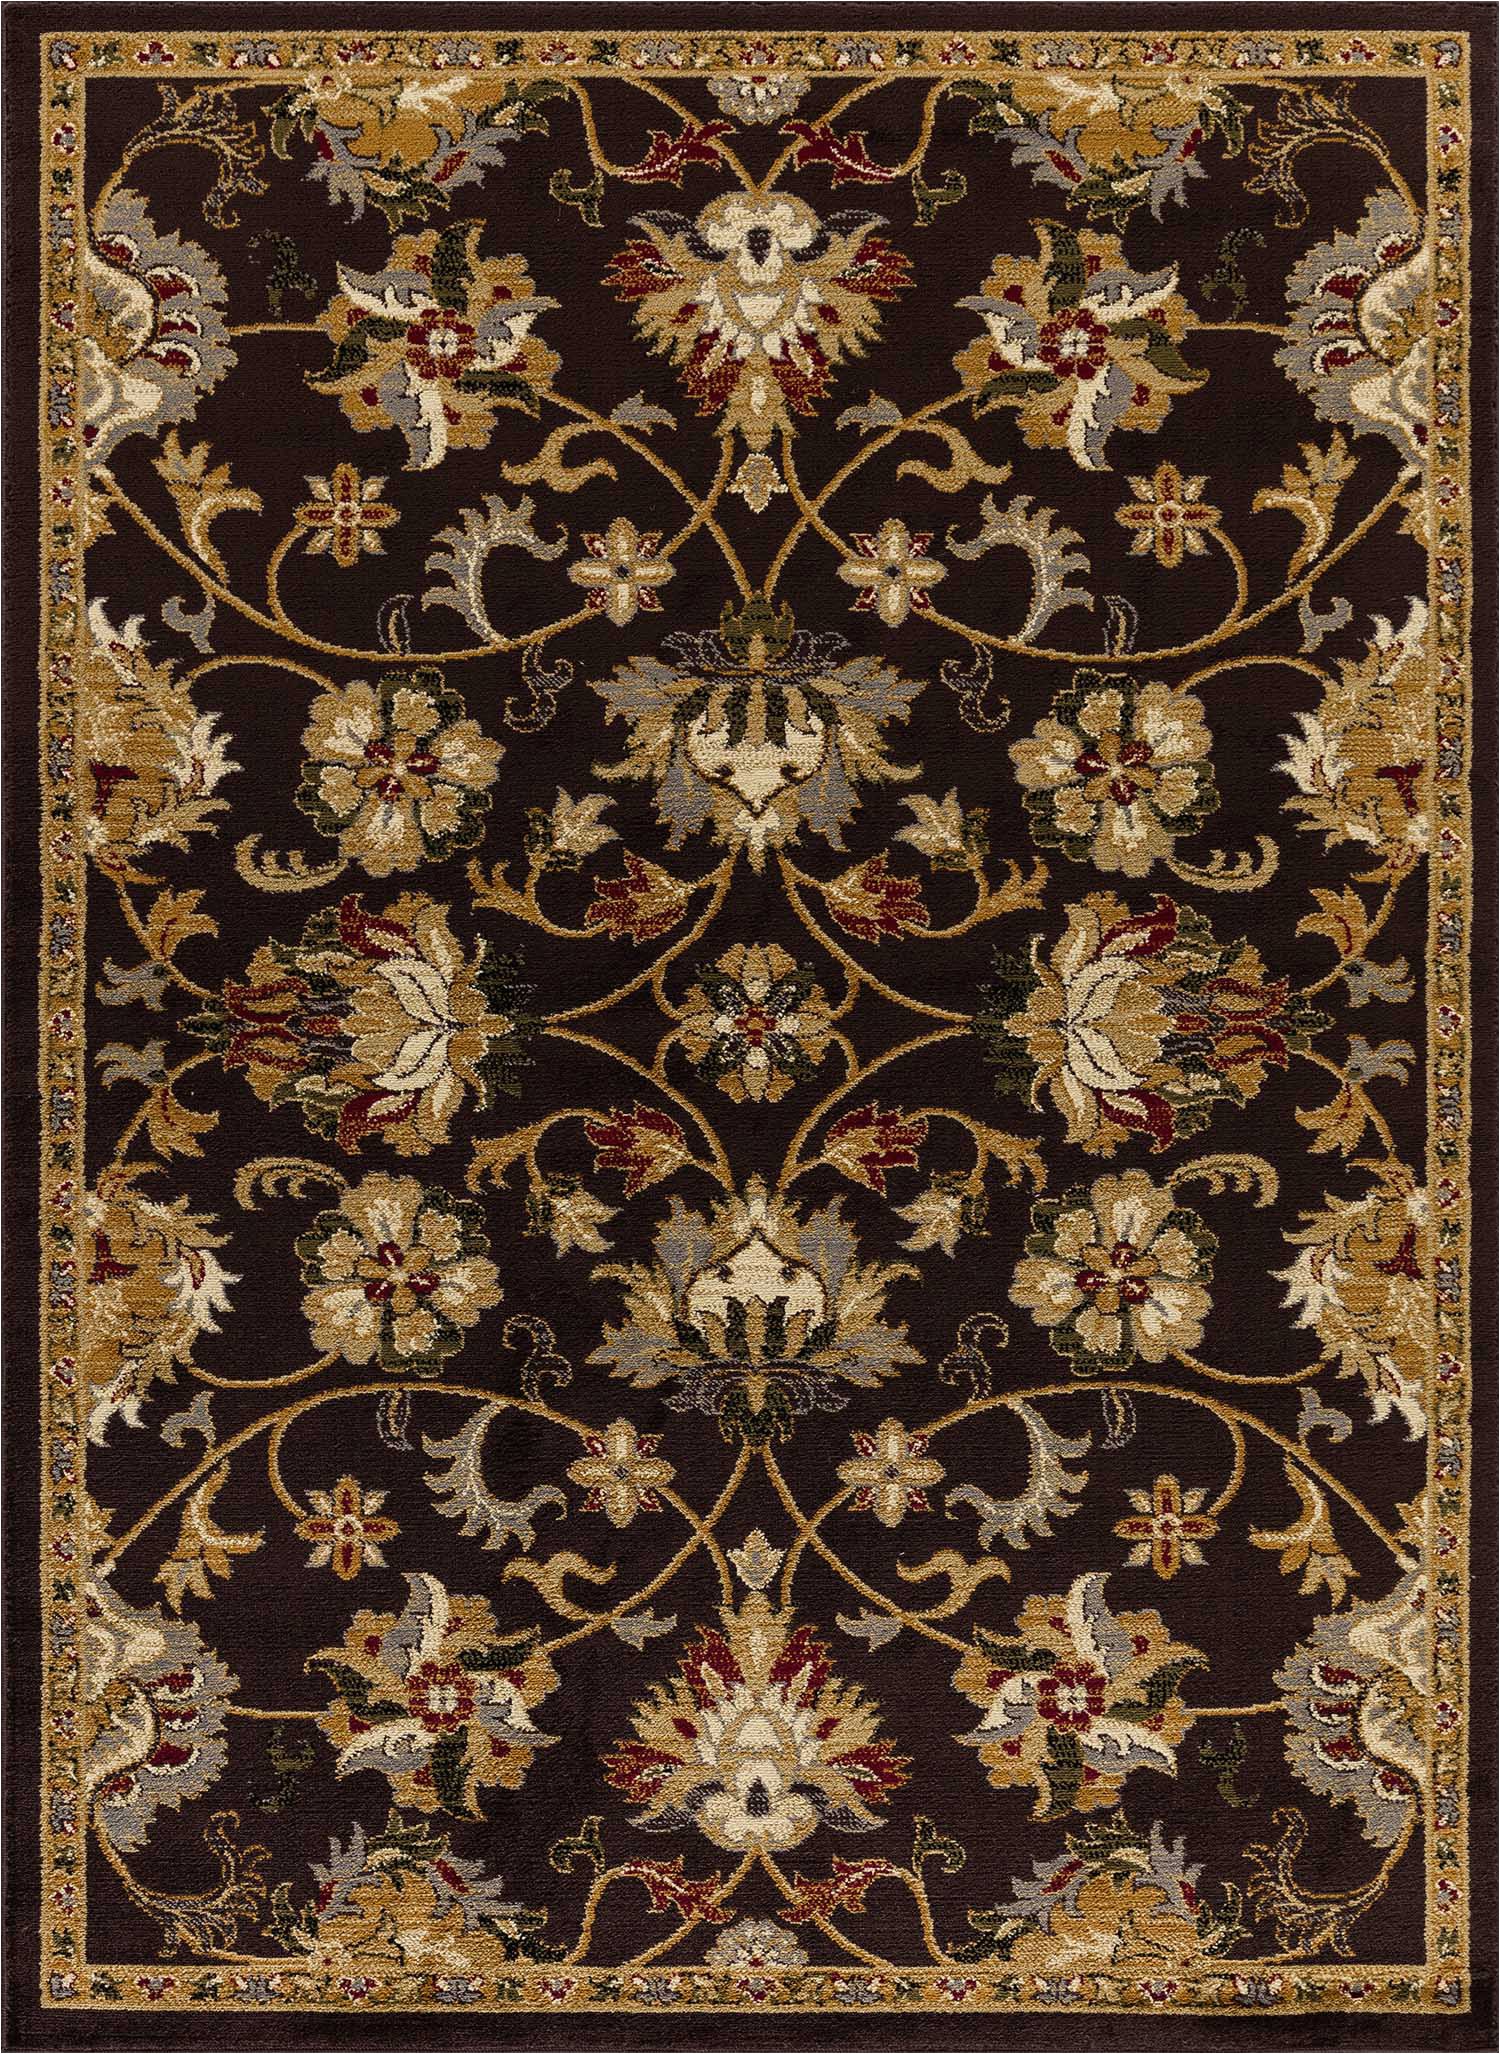 8 by 10 area Rugs for Sale Mod Arte Crown Collection area Rug Contemporary & Traditional Style Persian Inspired Medallion Print & Classic Border Brown